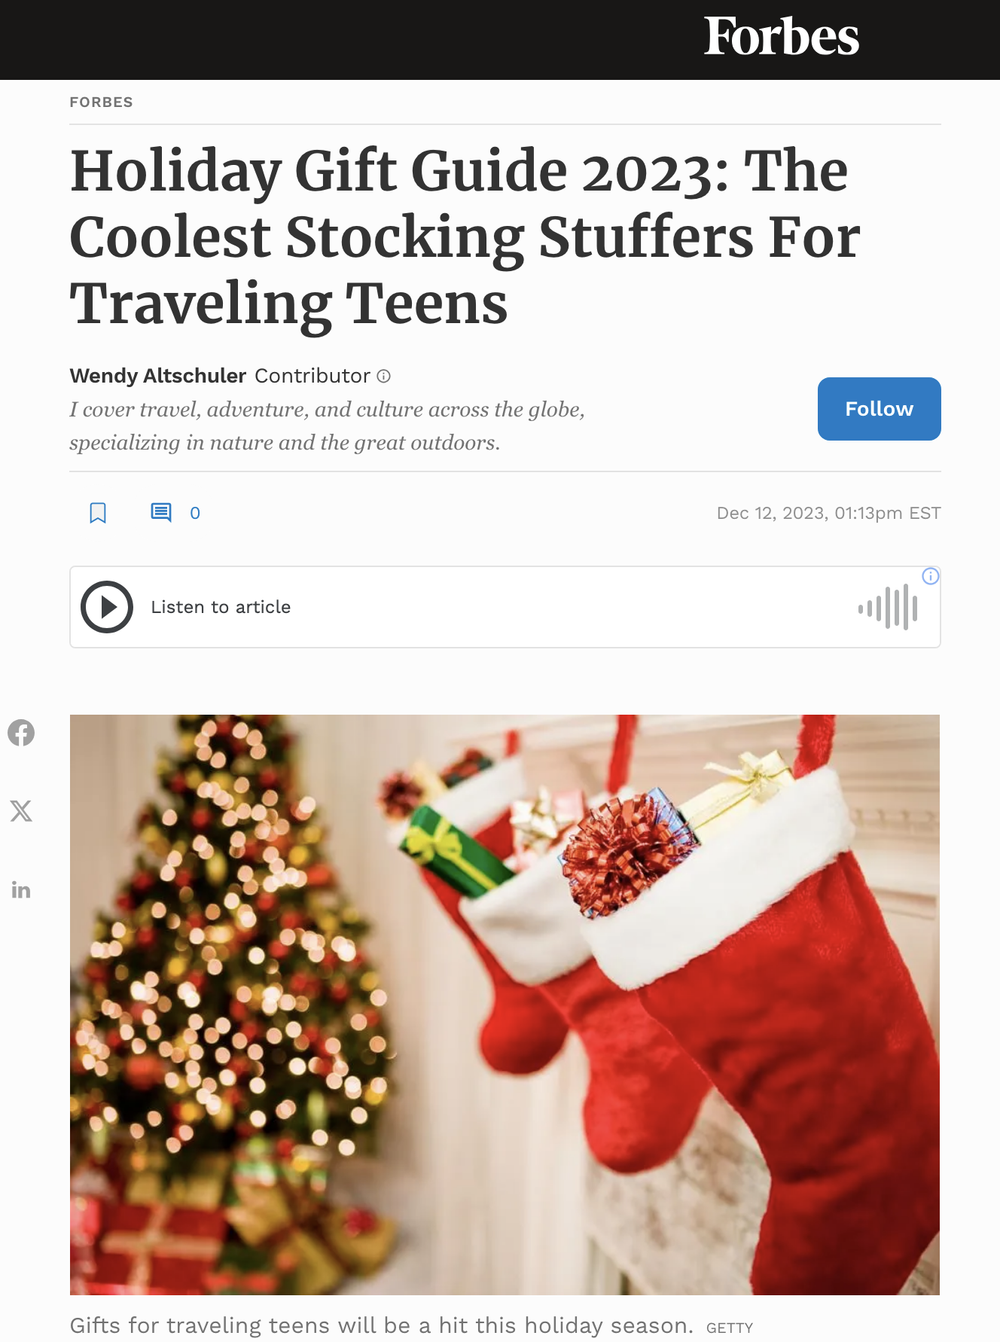 Holiday Gift Guide 2023: The Coolest Stocking Stuffers For Traveling Teens